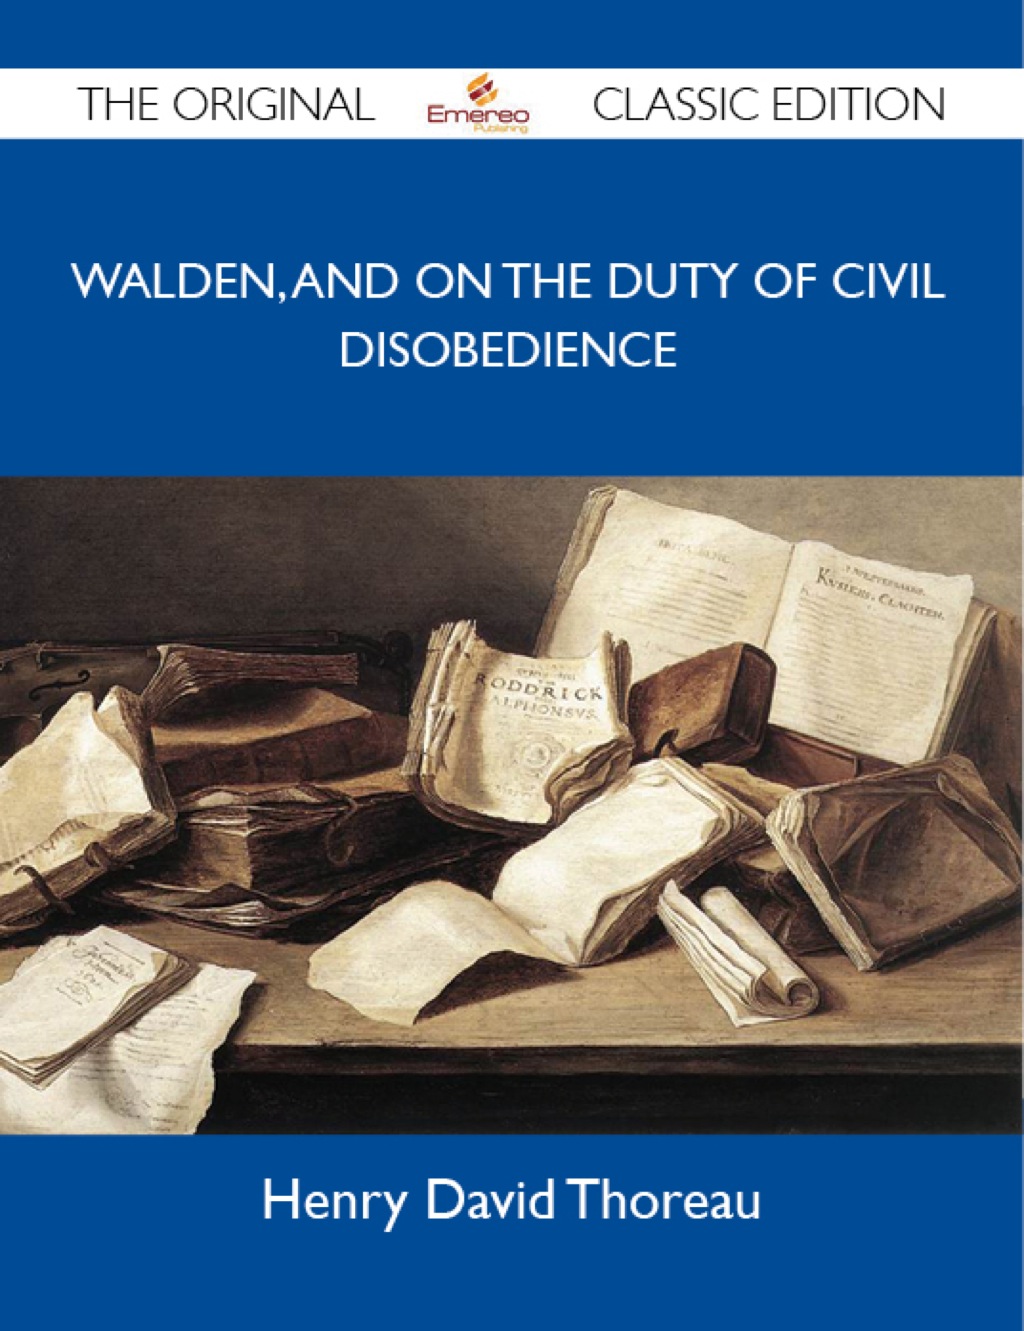 Walden  and On The Duty Of Civil Disobedience - The Original Classic Edition (eBook) - Thoreau Henry,